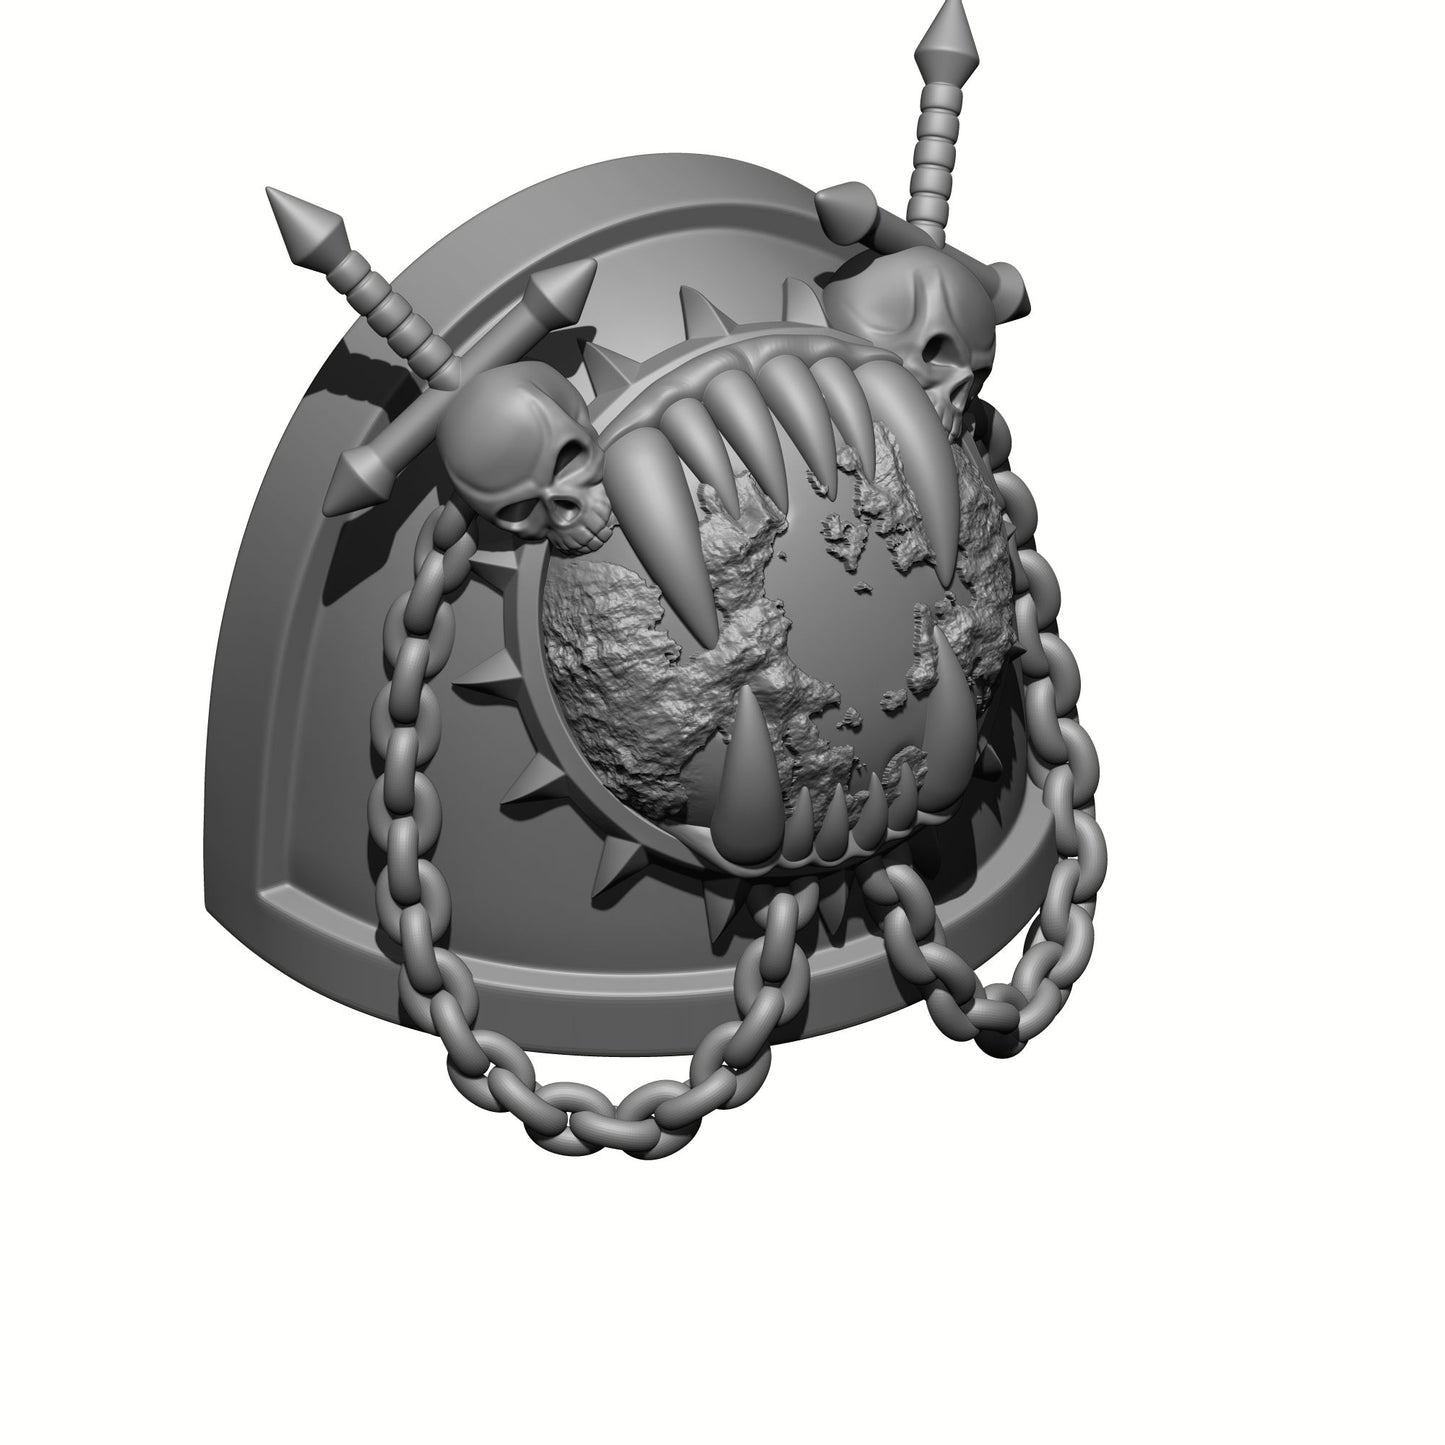 World Eaters Chapter MKVII Shoulder Pad Teeth Eating Planet Two Skulls Chains and Swords: Compatible with McFarlane Space Marine Khornate Berzerkers Action Figures